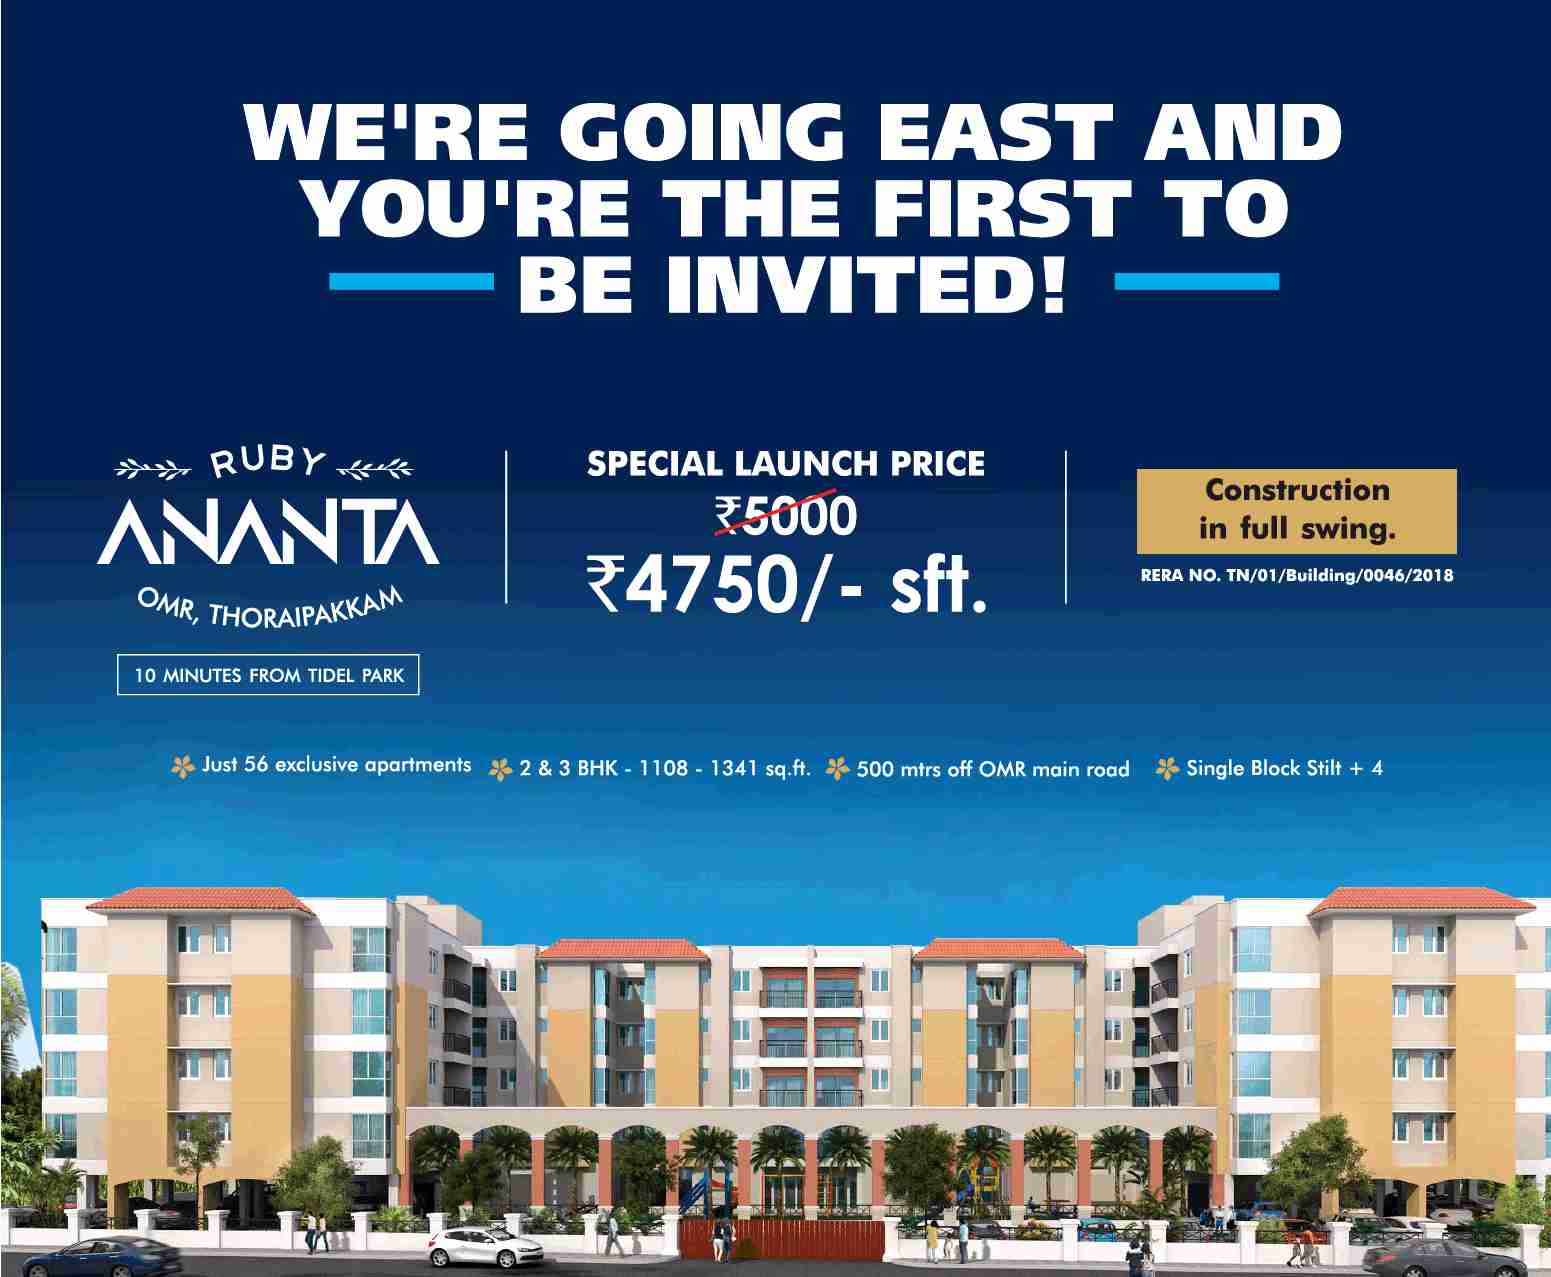 Avail special launch price of Rs. 4750 per sqft. at Ruby Ananta in Chennai Update